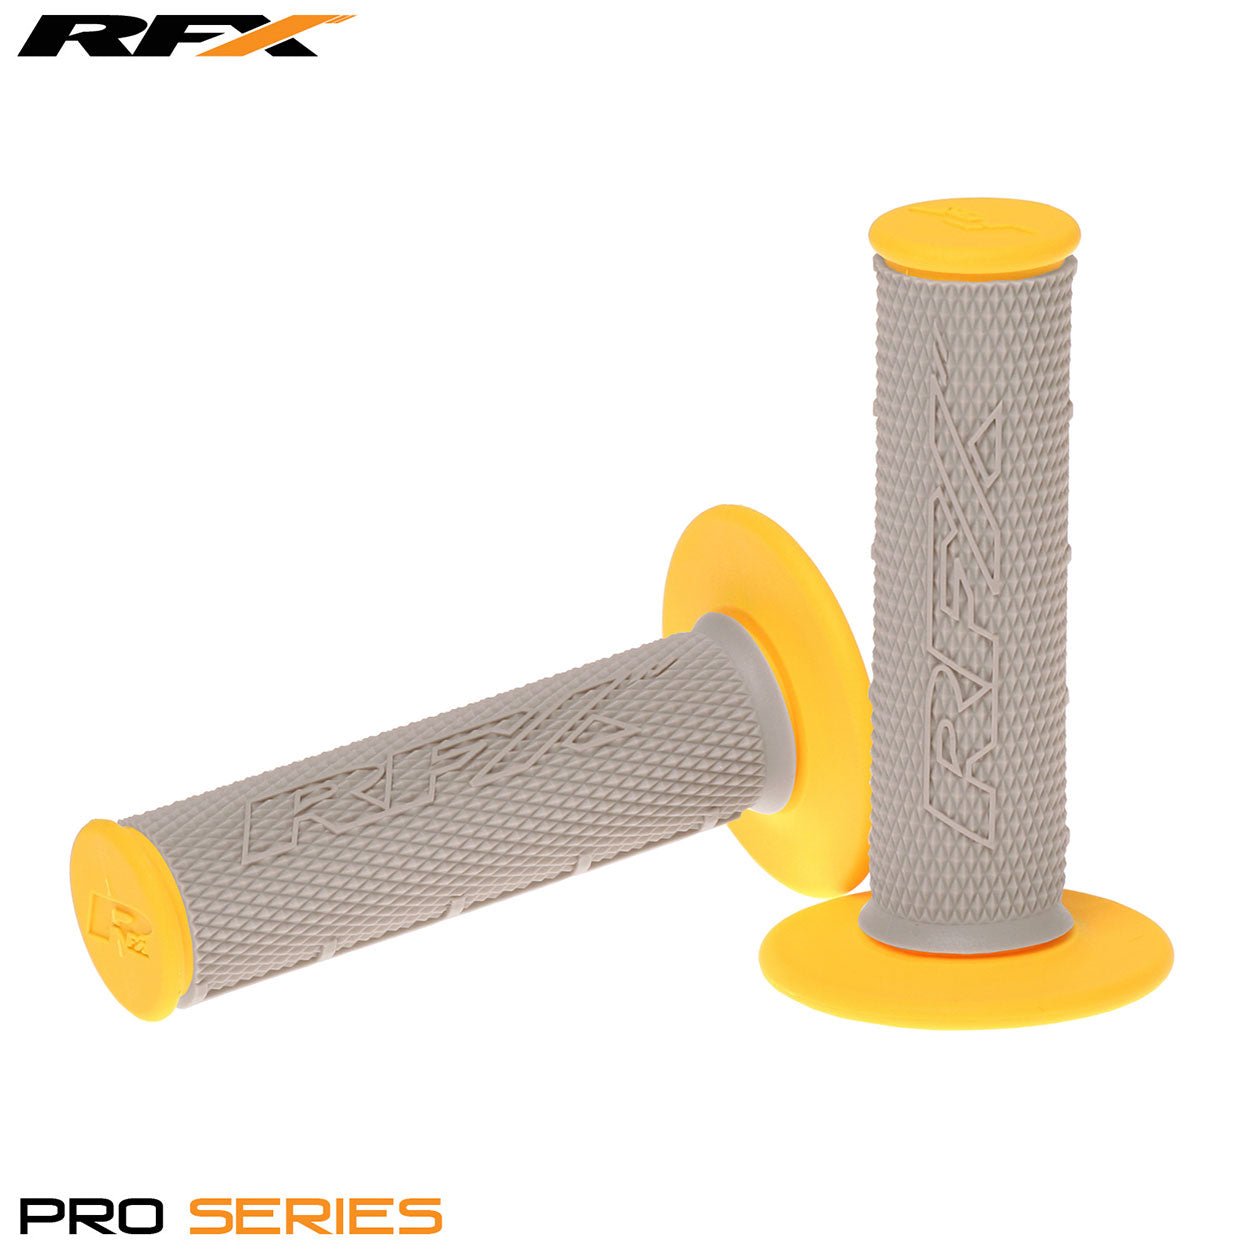 RFX Pro Series Dual Compound Grips Grey Centre (Grey/Yellow) Pair - Yellow - RFX